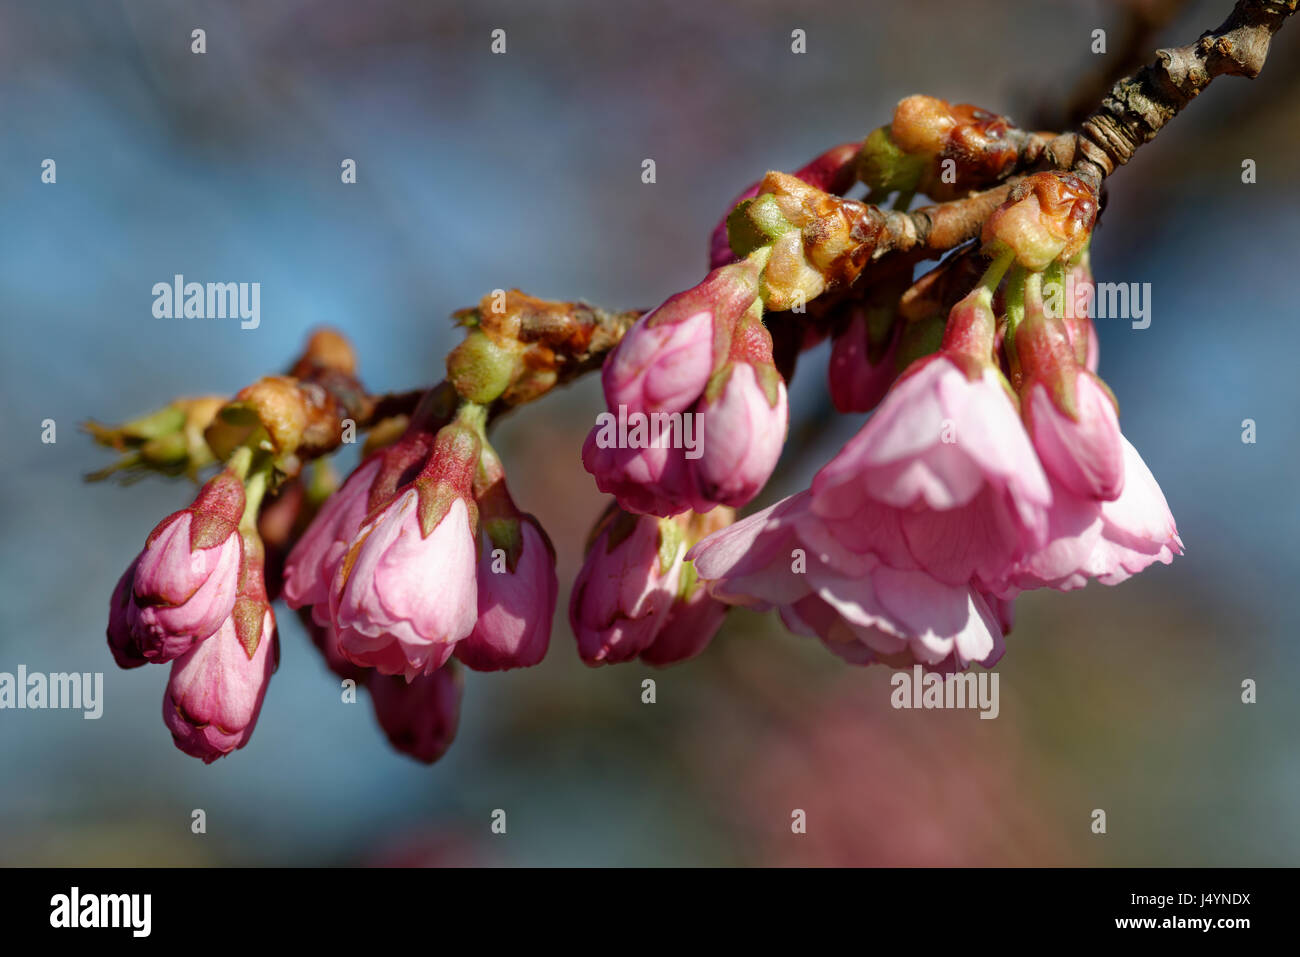 The buds of a cherry tree (Prunus avium) are pink, which is in contrast to the blue sky in the blurred background. Stock Photo